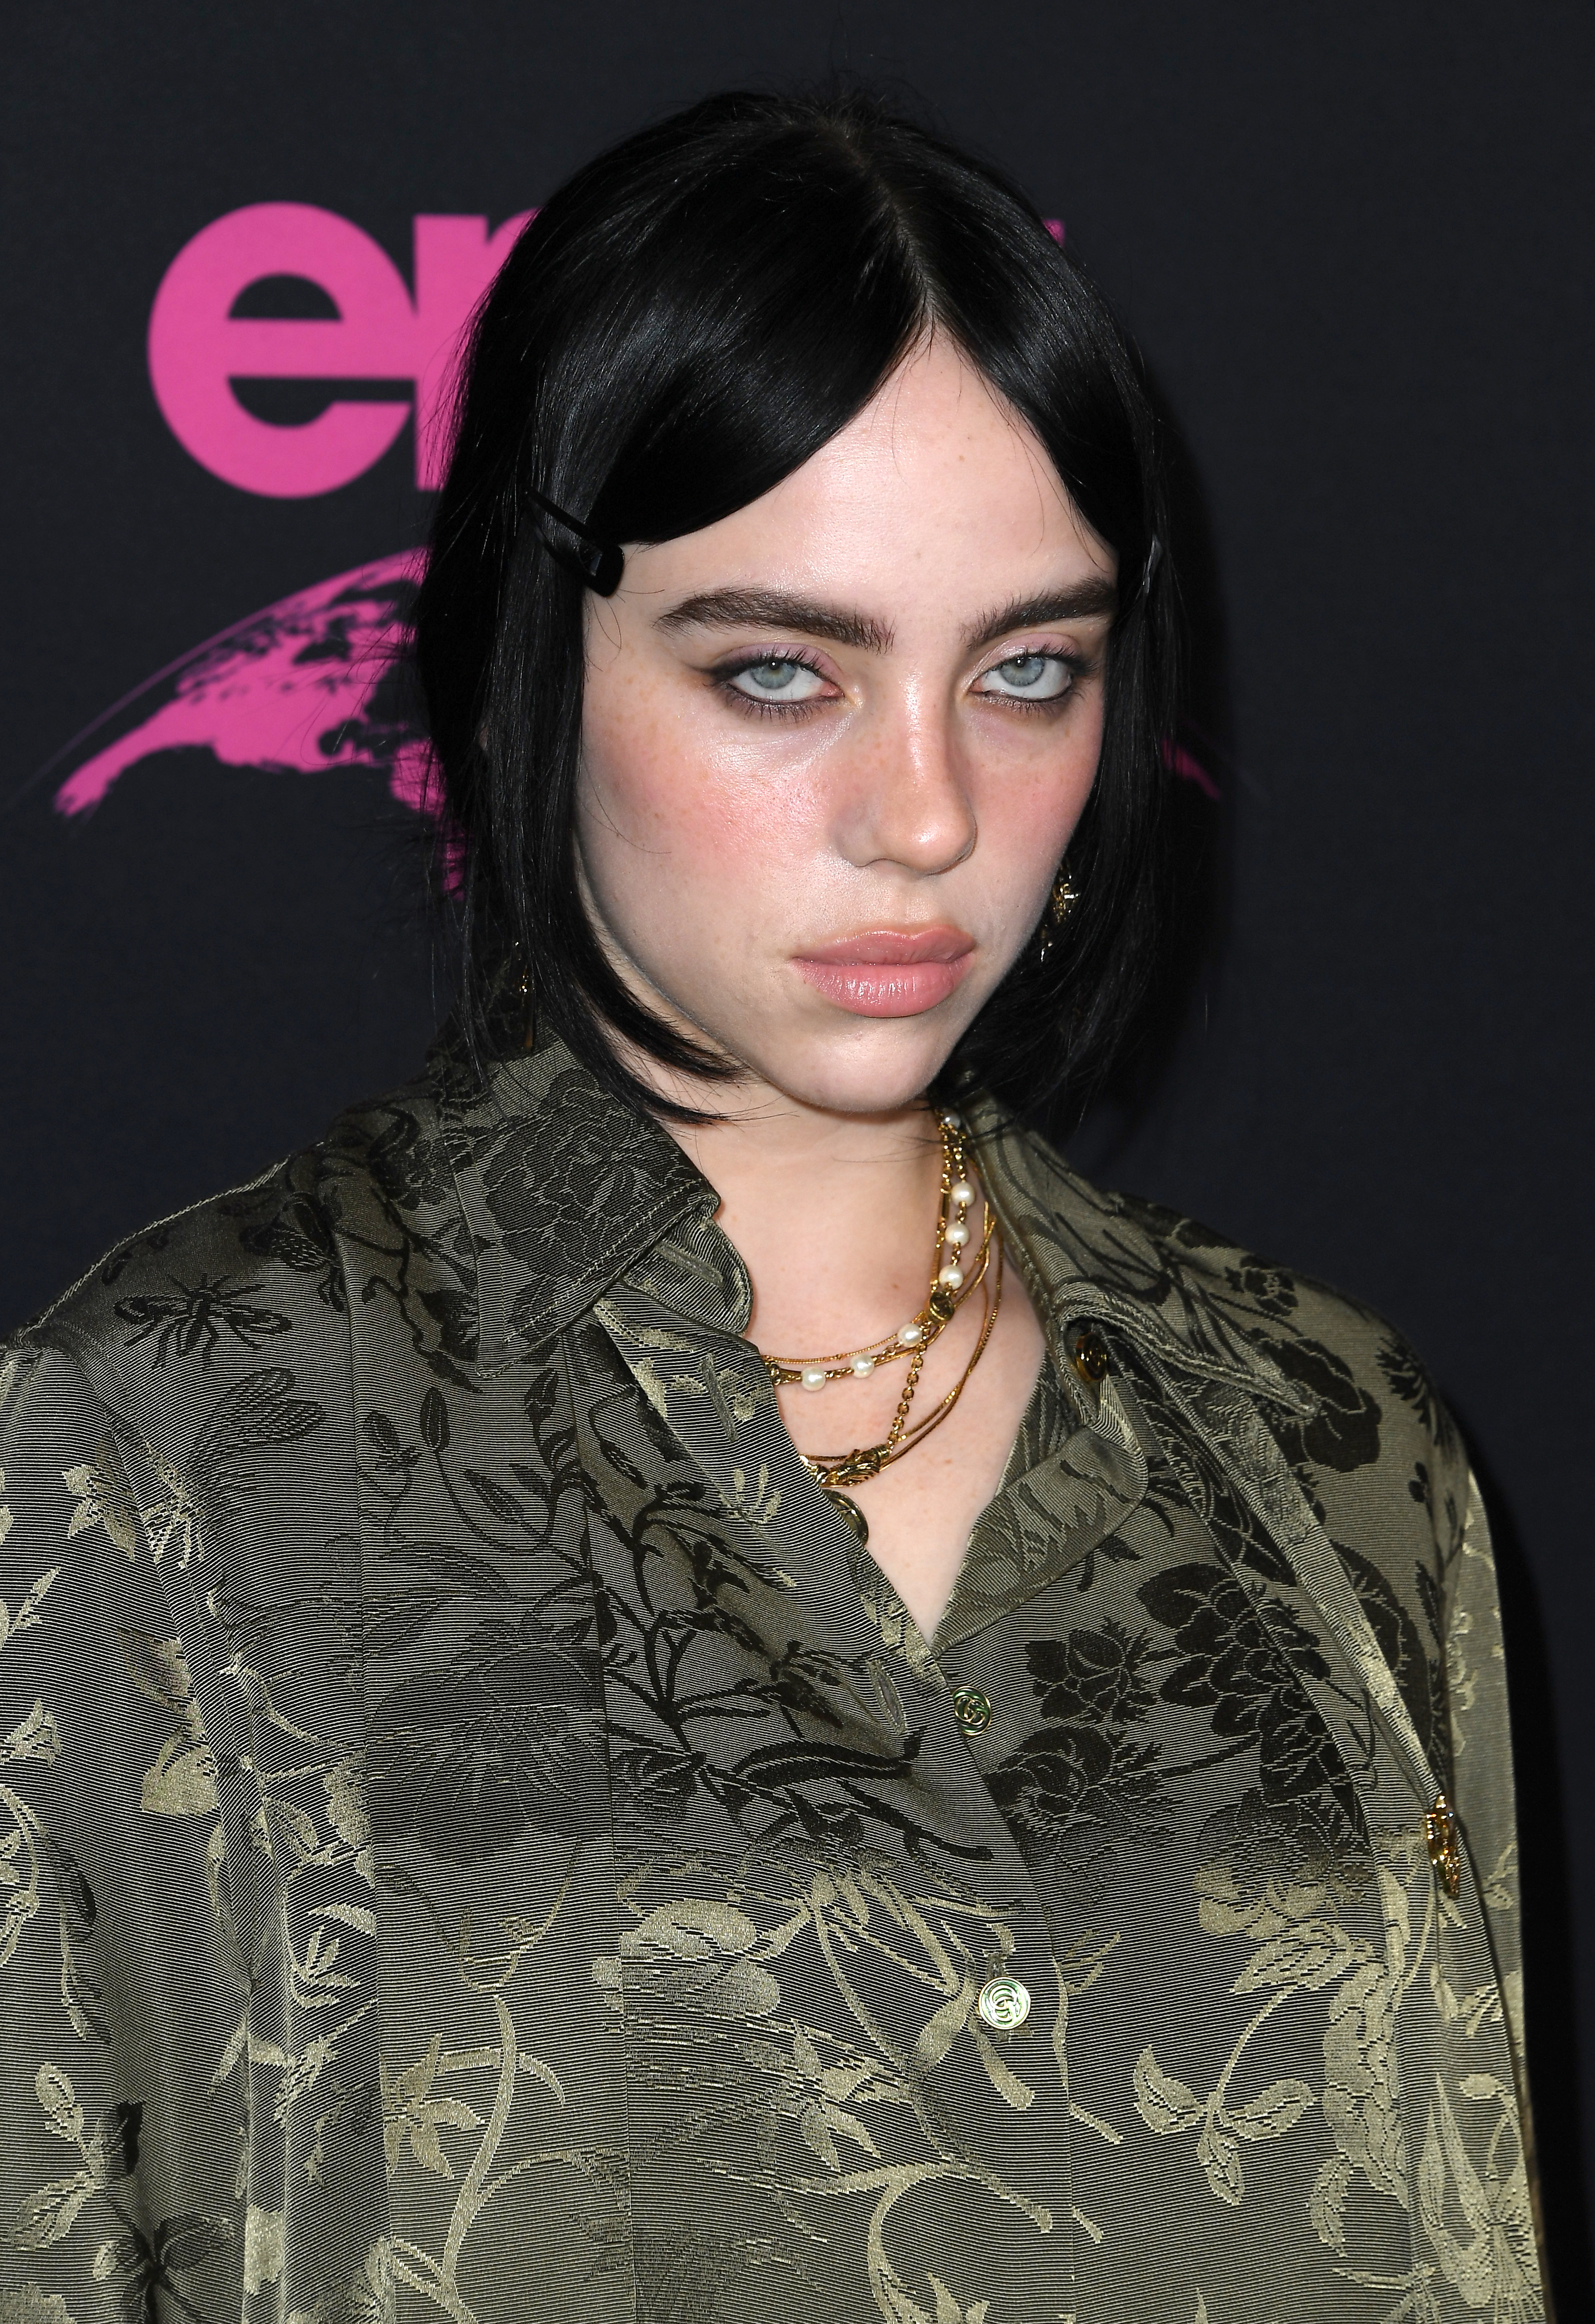 Close-up of Billie at a media event wearing a paisley outfit